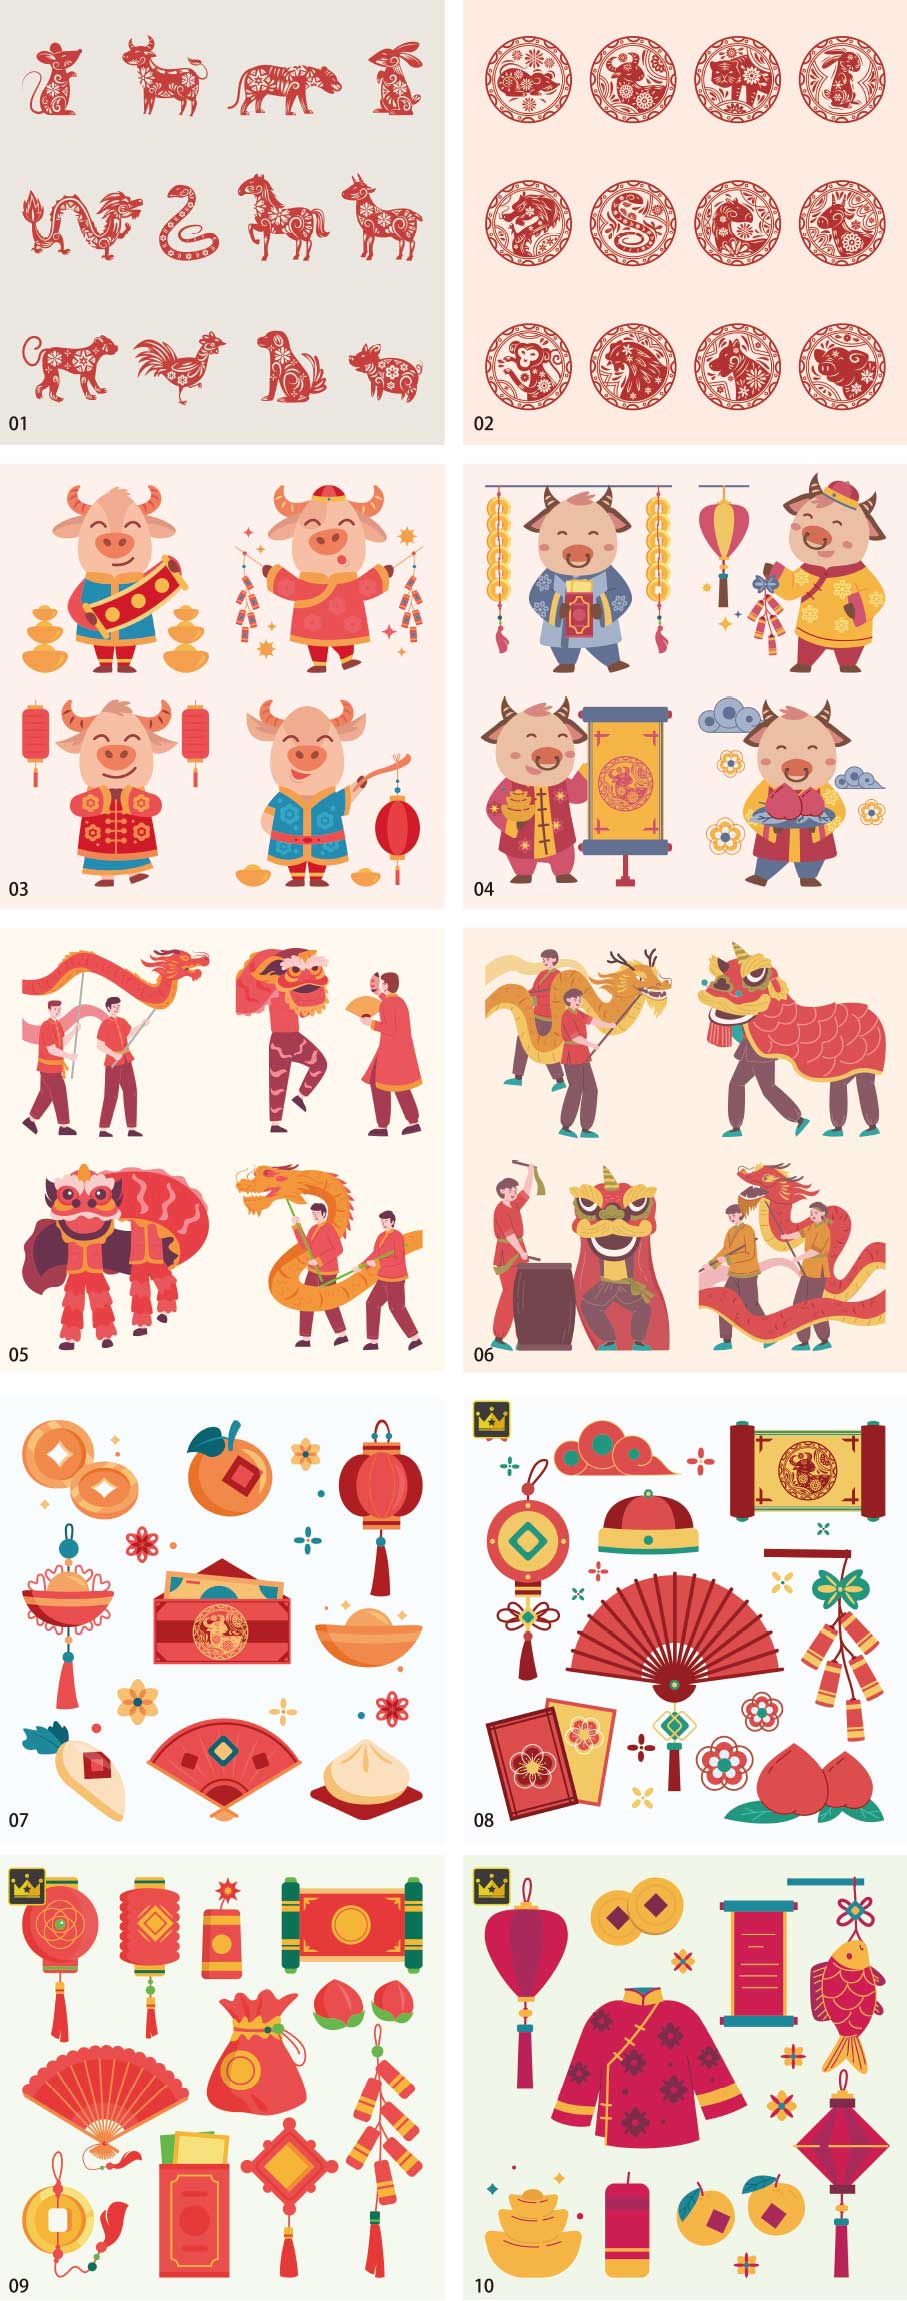 Lunar New Year Illustration Collection vol.3